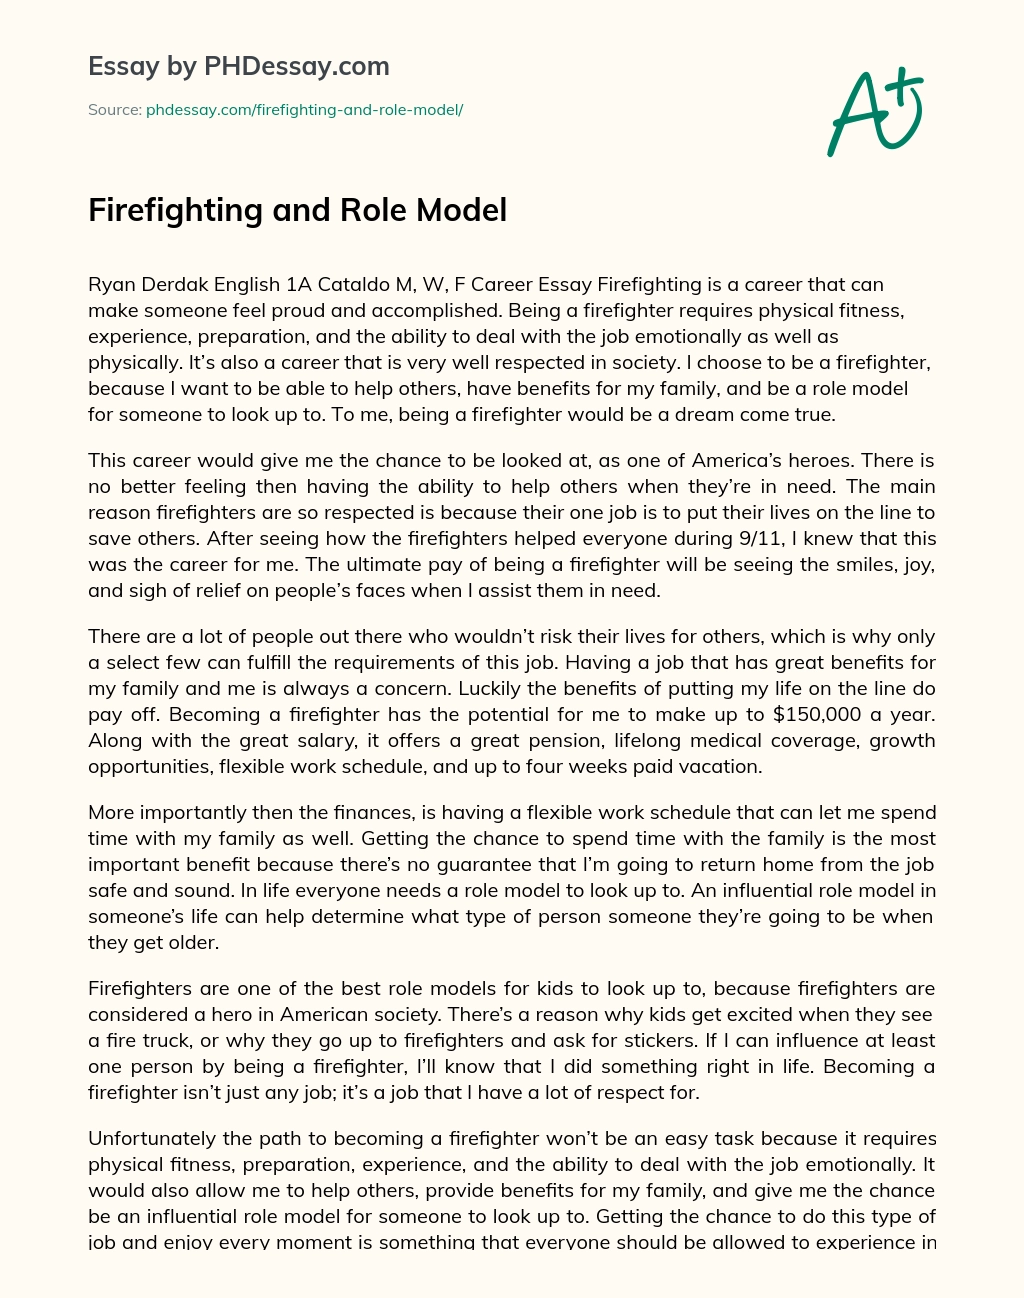 Firefighting and Role Model essay